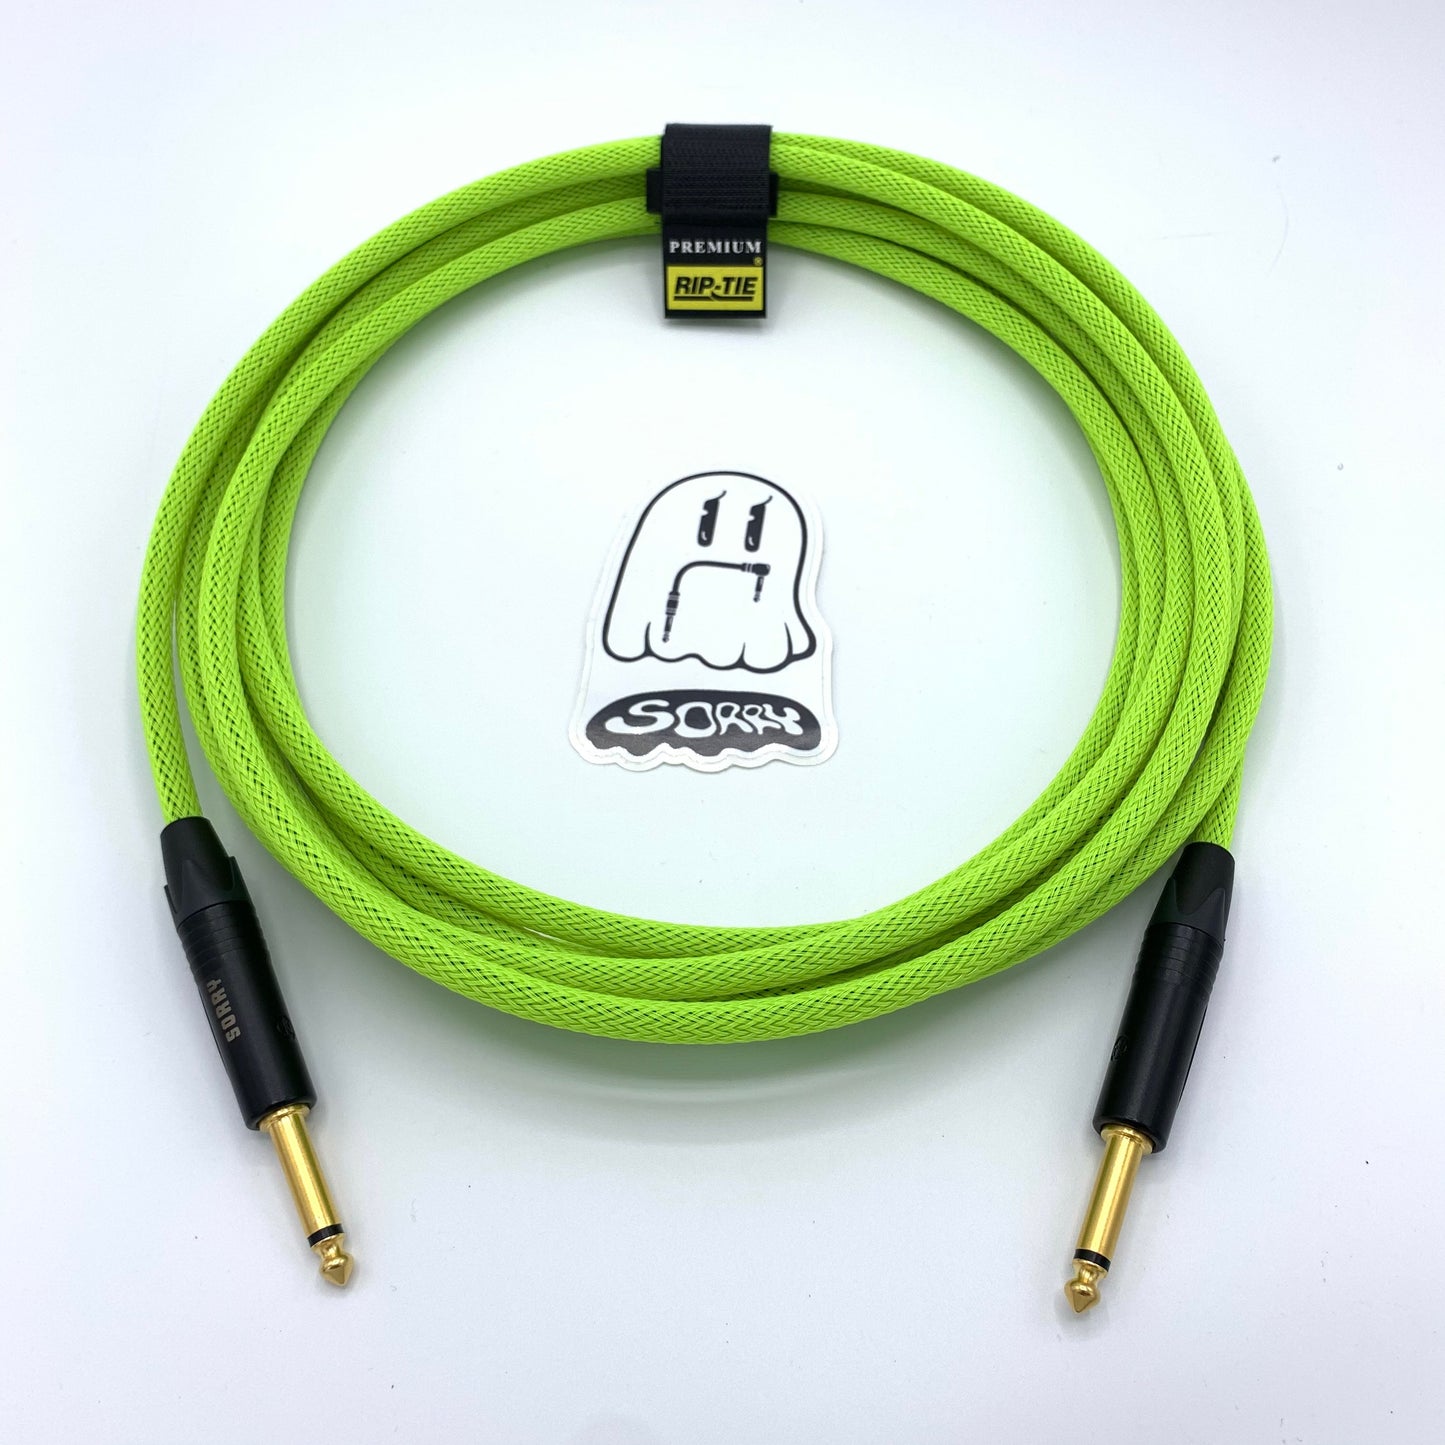 SORRY Straight to Straight Guitar / Instrument Cable - Highlighter Yellow